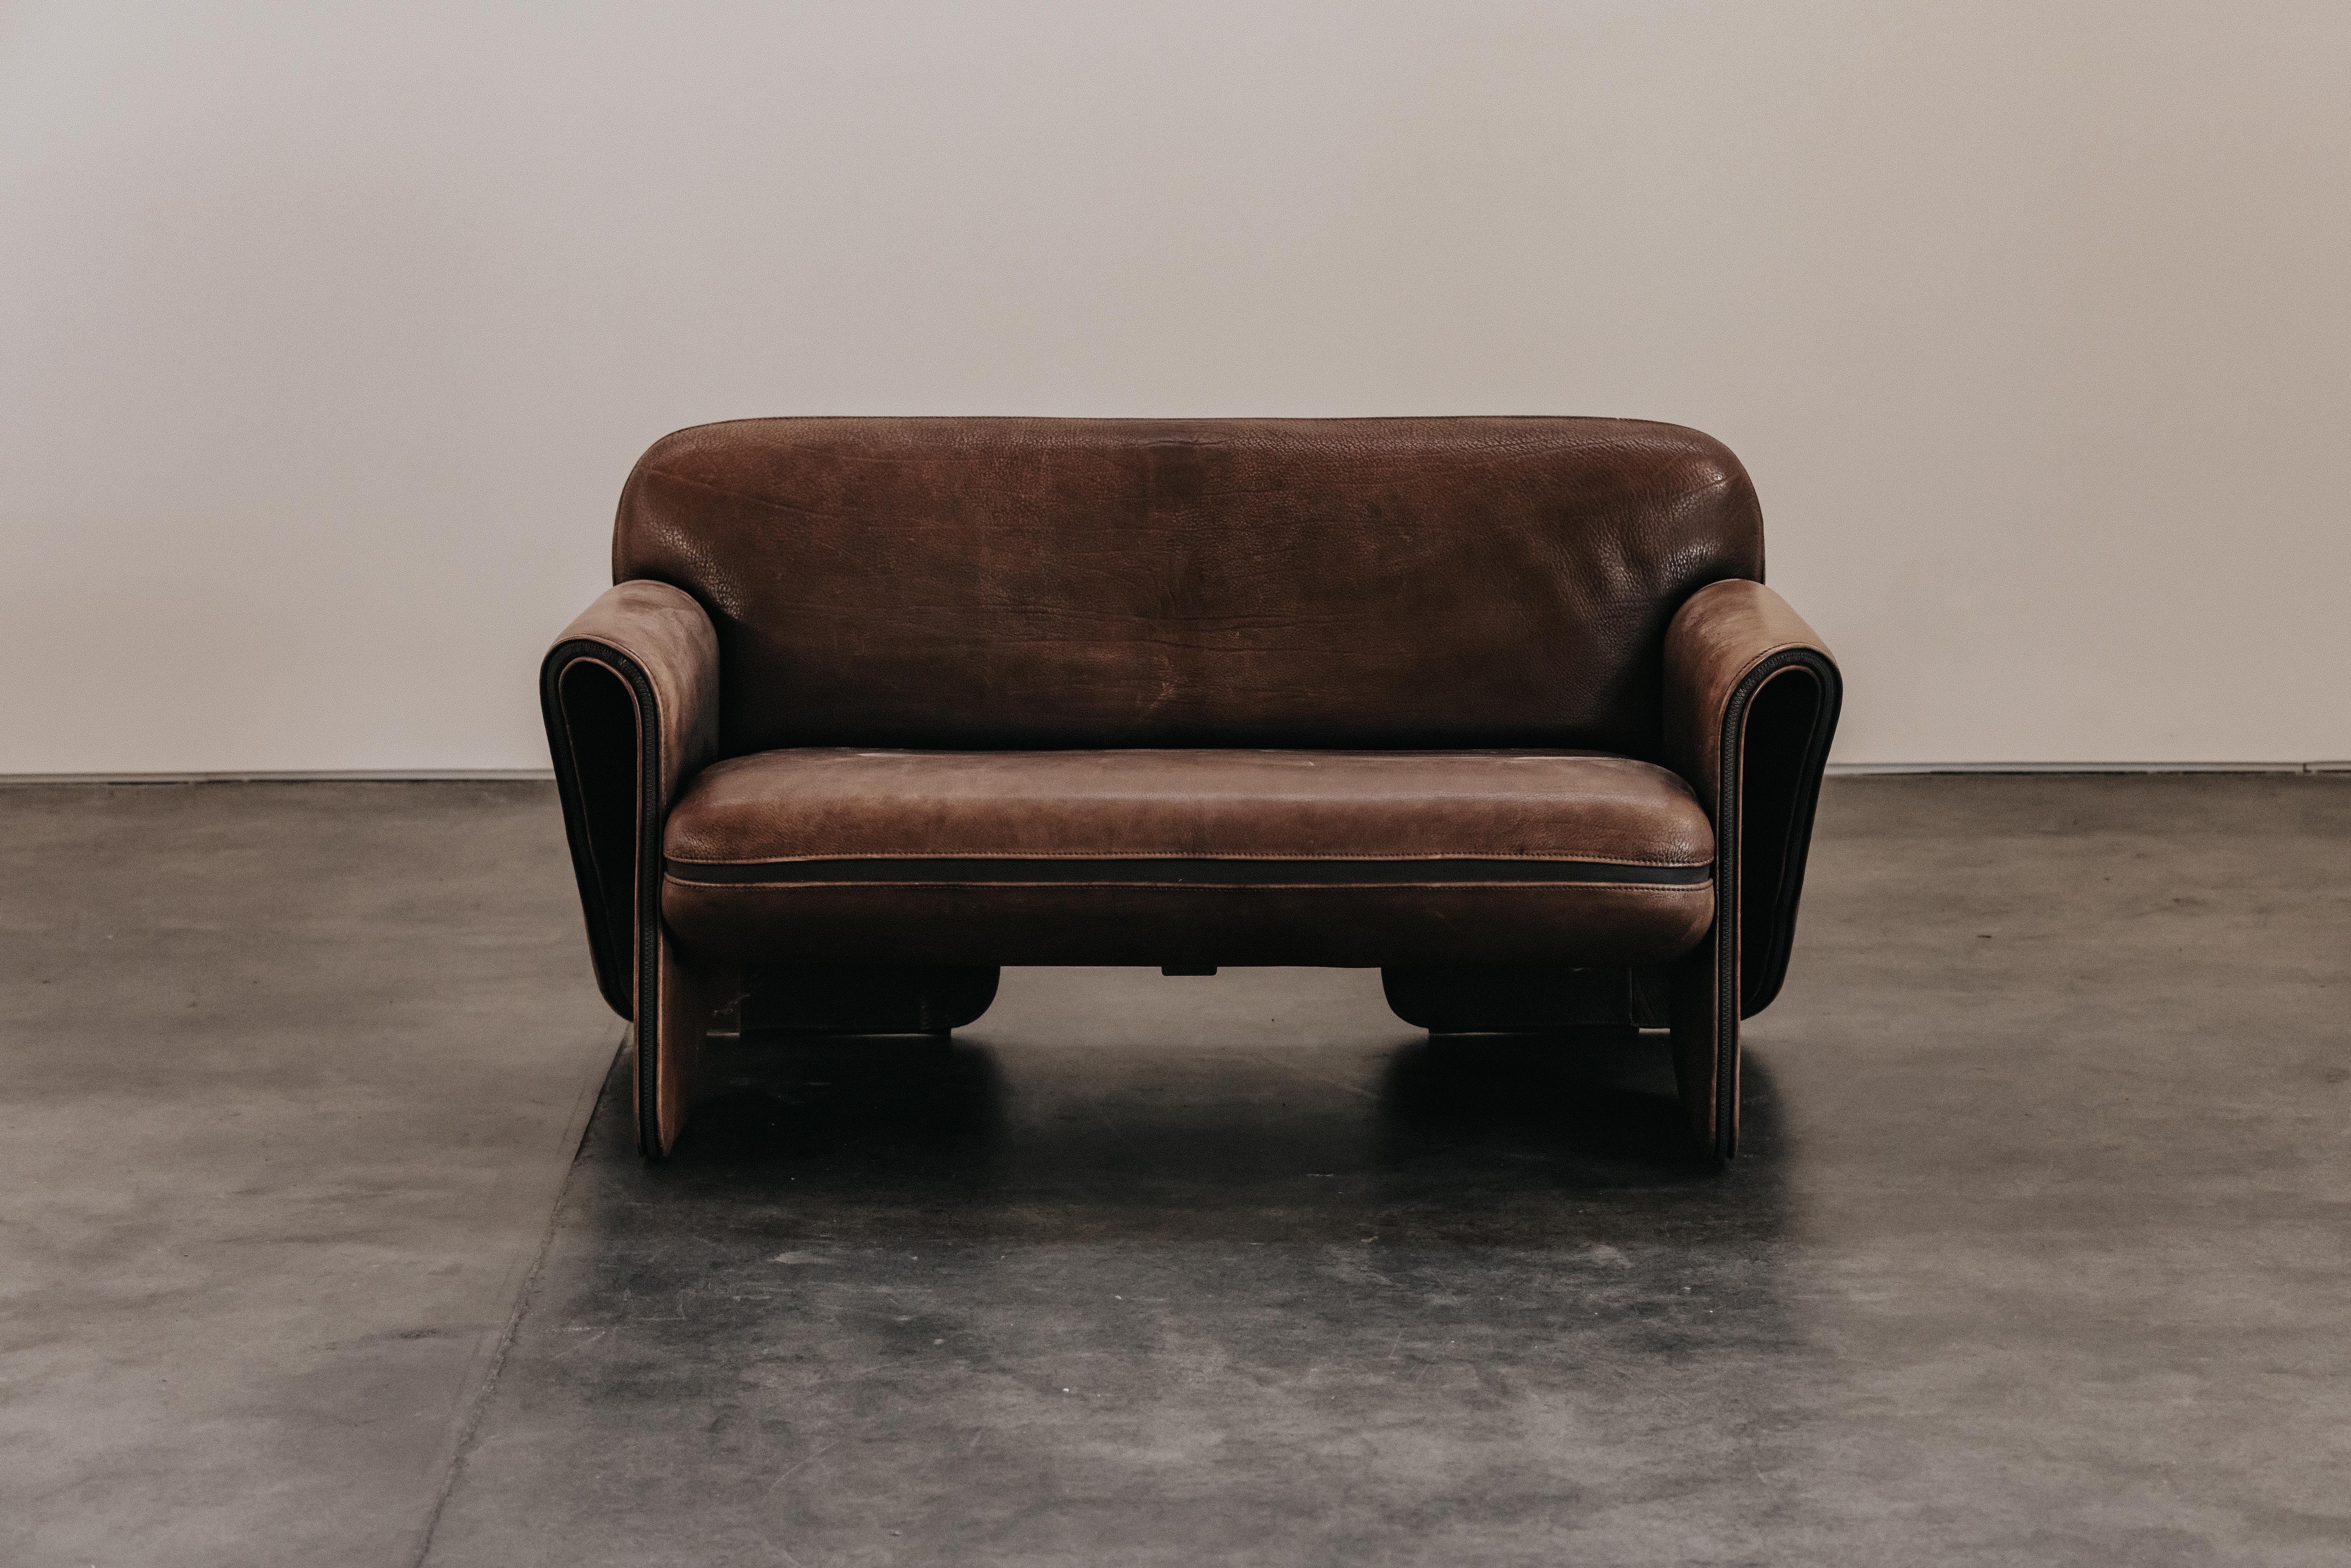 Vintage Brown Leather De Sede DS125 Sofa From Switzerland, Circa 1970.  Original brown leather upholstery with great wear and patina.